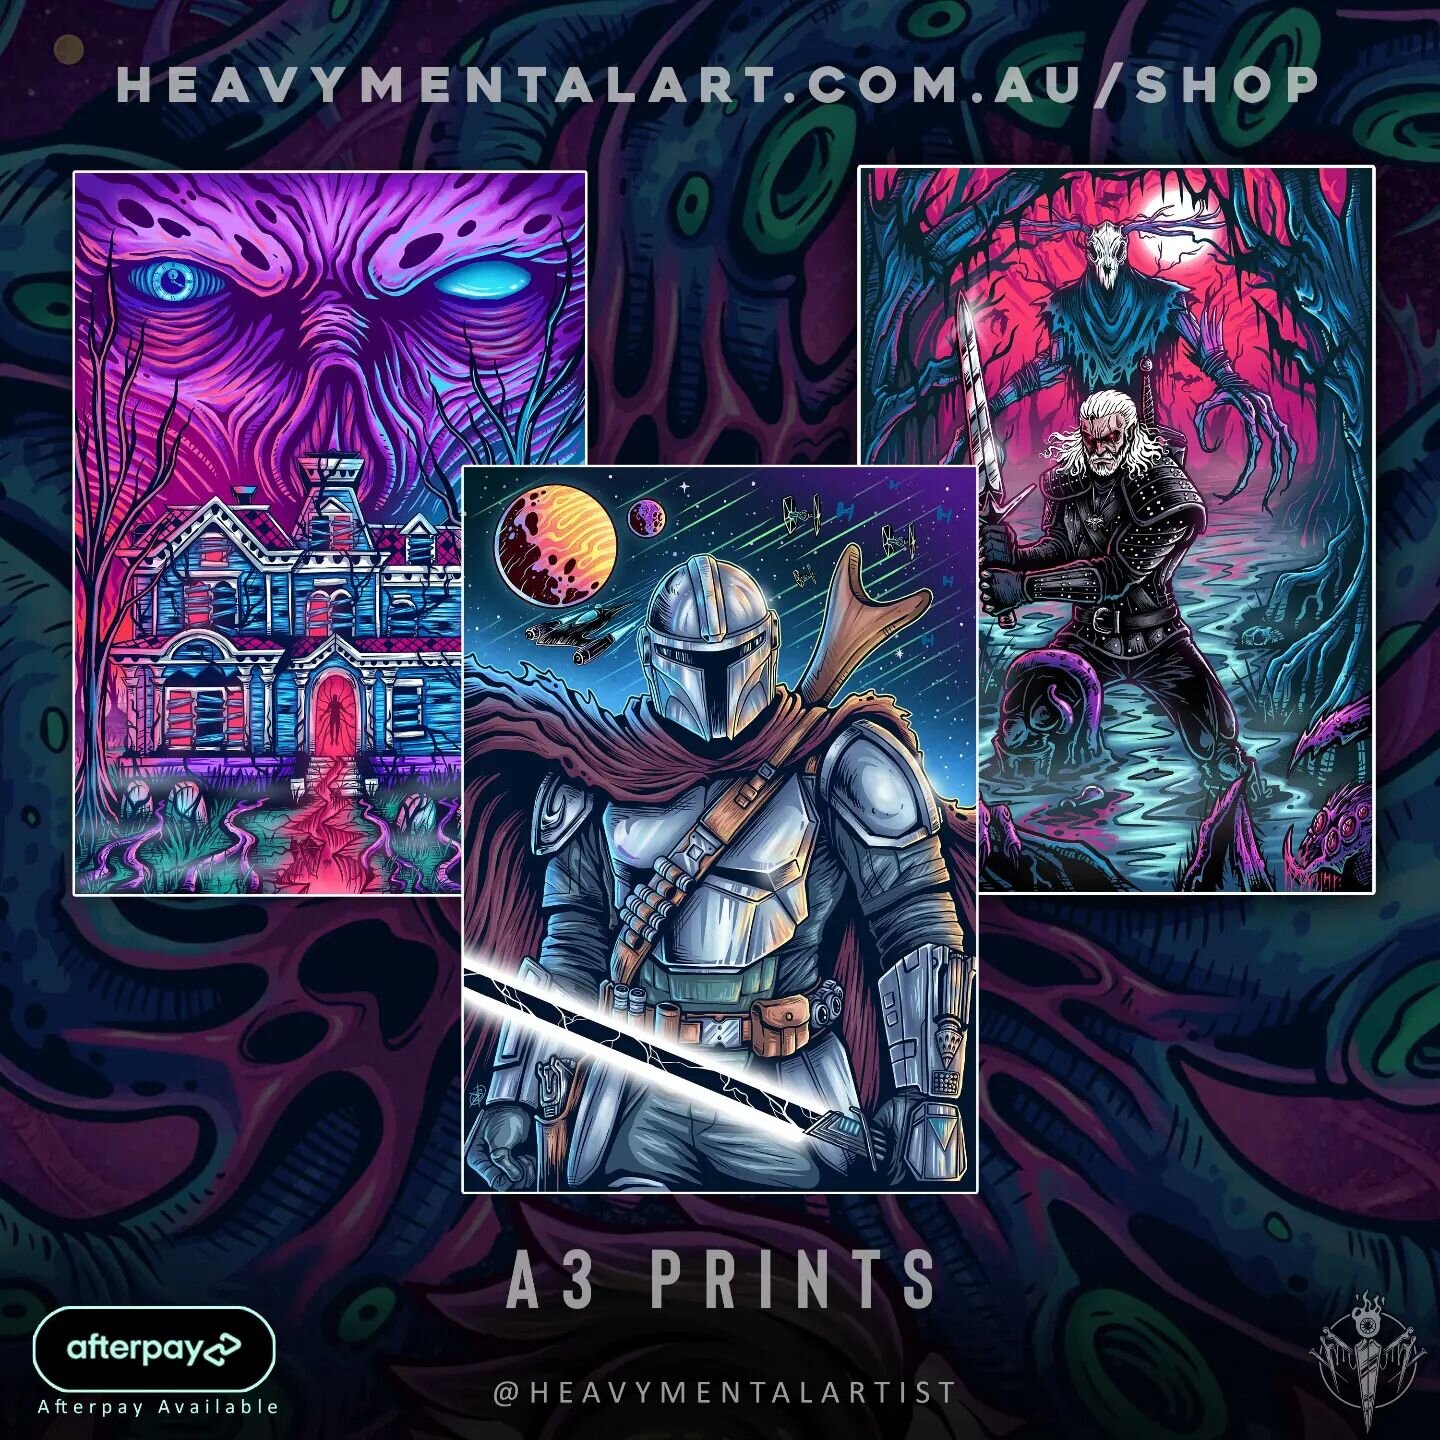 New A3 Prints For Your Wall!

Just uploaded some of my new A3 prints to my online shop! Printed onto 250 GSM Satin paper, for those of you who wanted to grab some art at the recent events or couldn't make it.
All newer prints are all signed and numbe